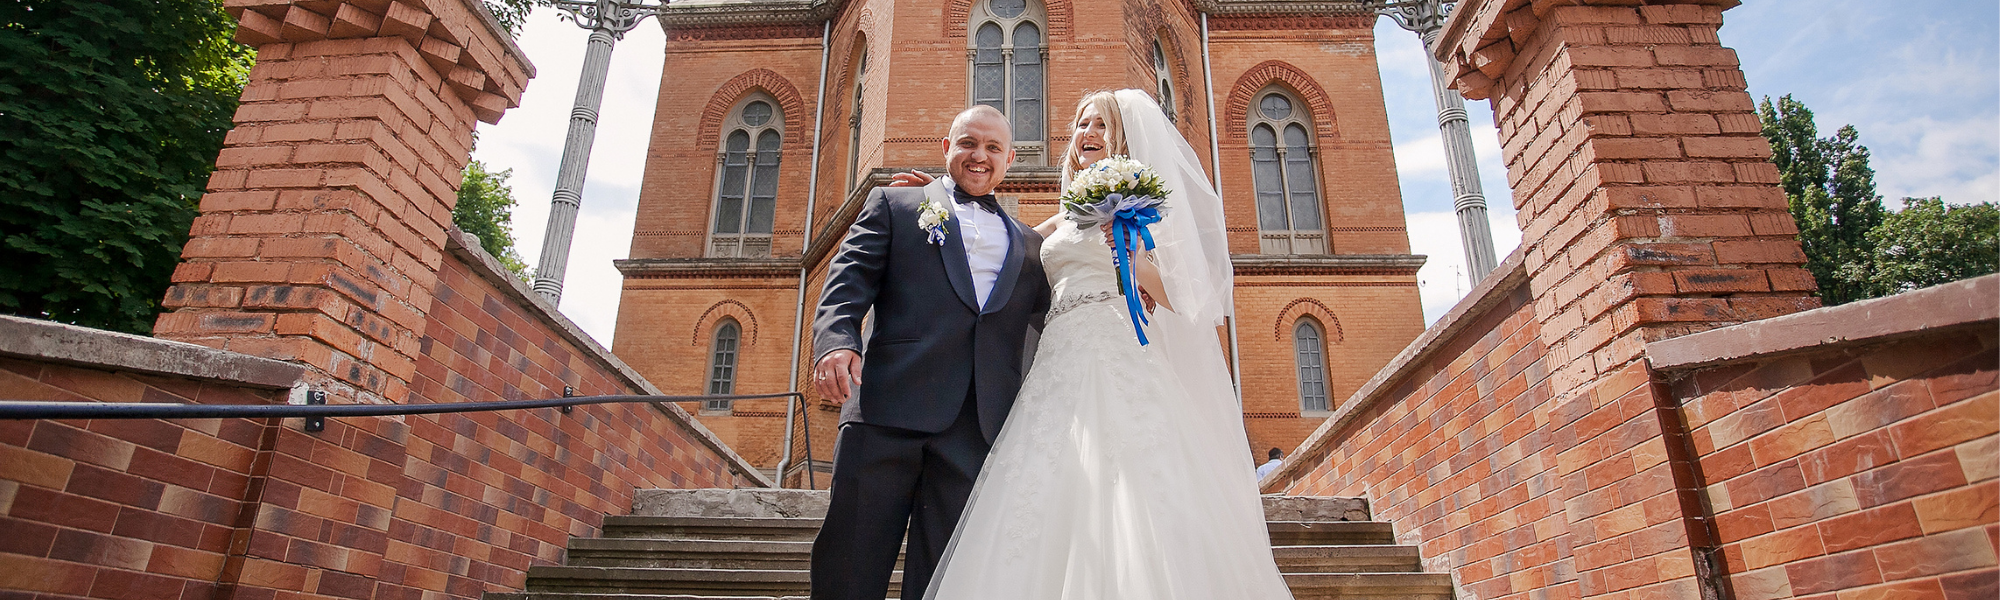 Newly wedded couple standing in front of a church 